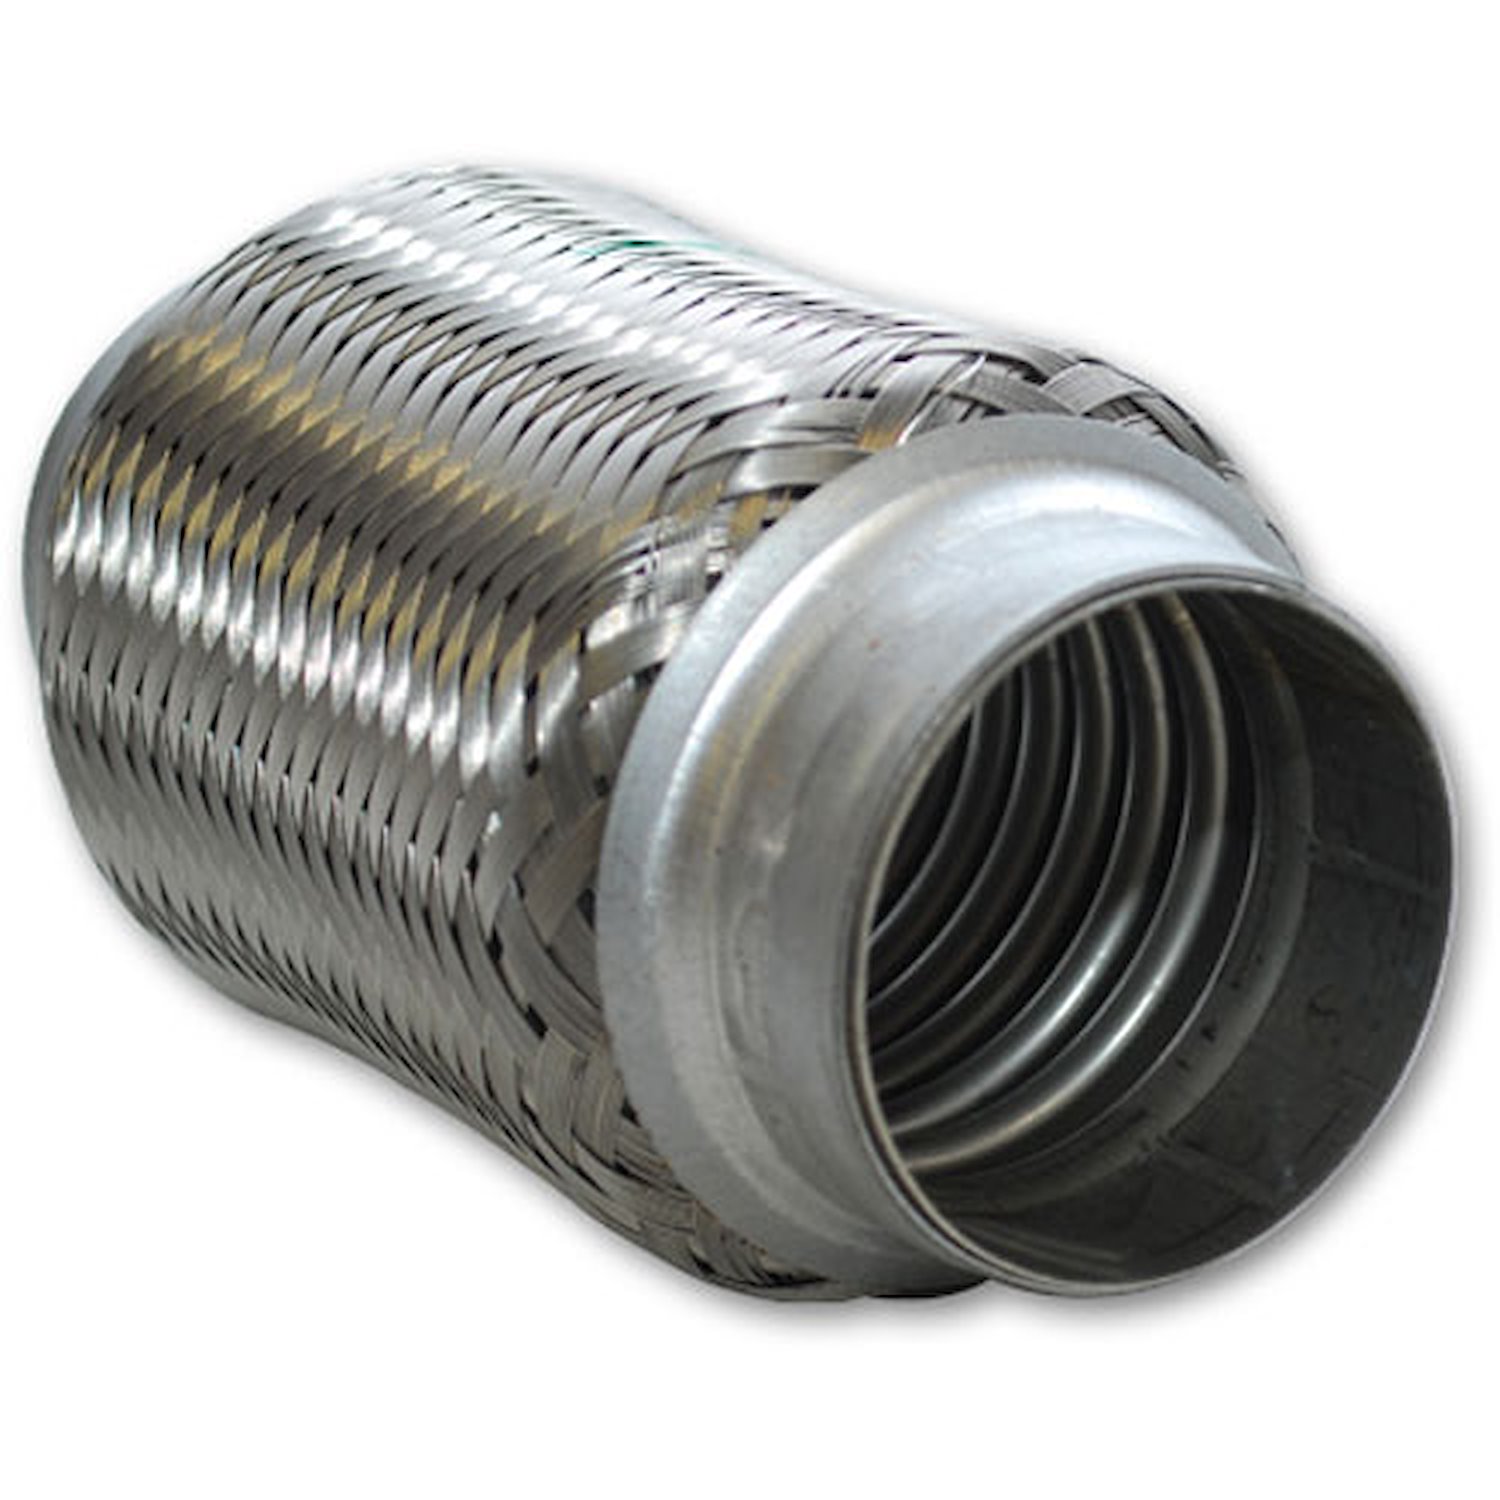 Standard Flex Coupling Without Inner Liner 2.25" Inlet/Outlet Diamater